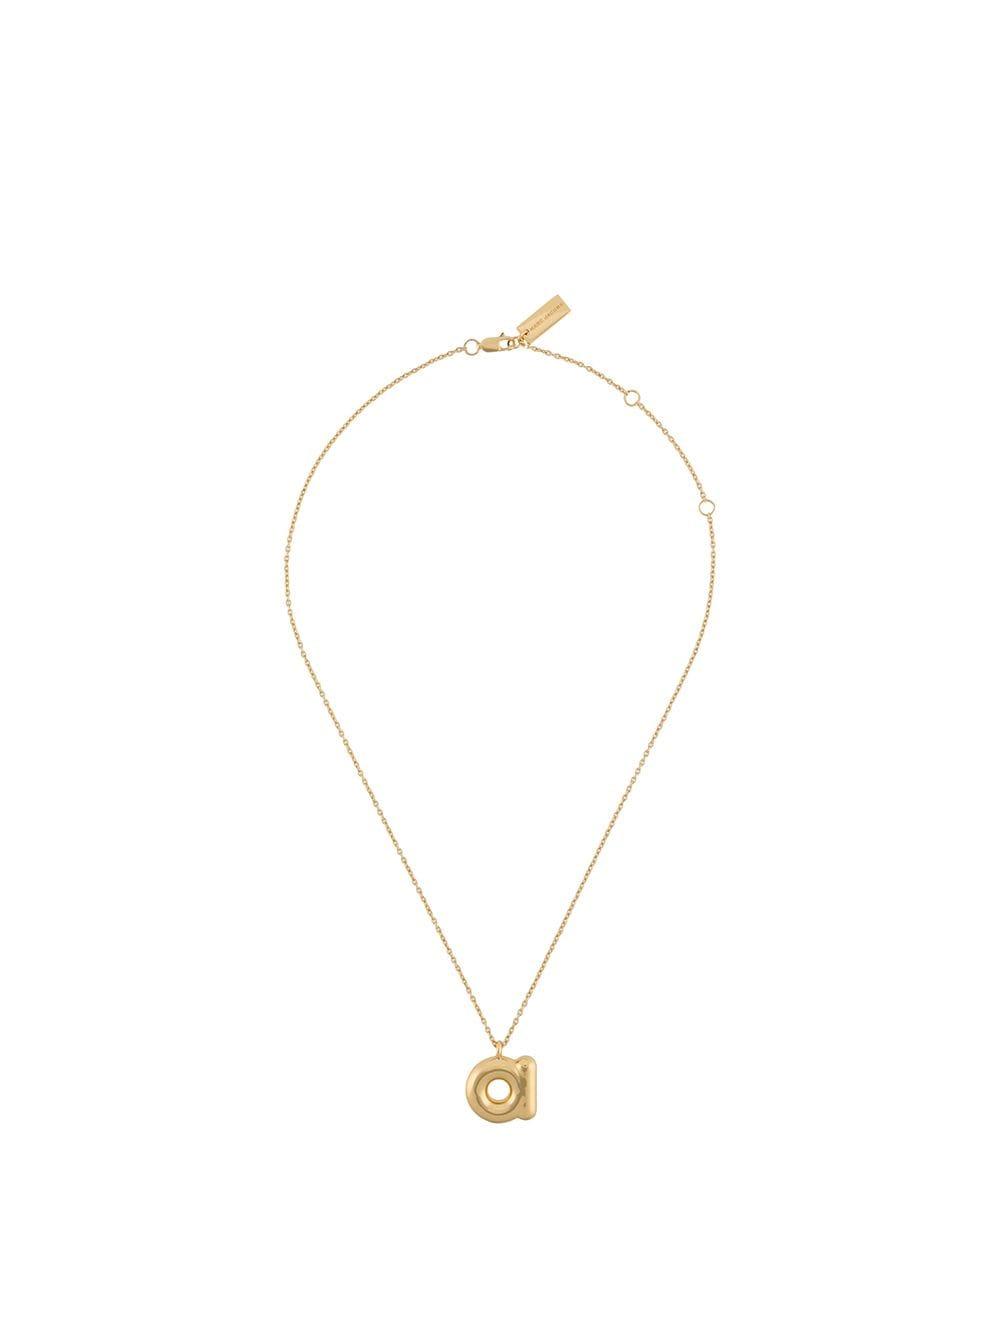 Marc Jacobs Jewelry Online Shop - Silver Womens The Monogram Chain